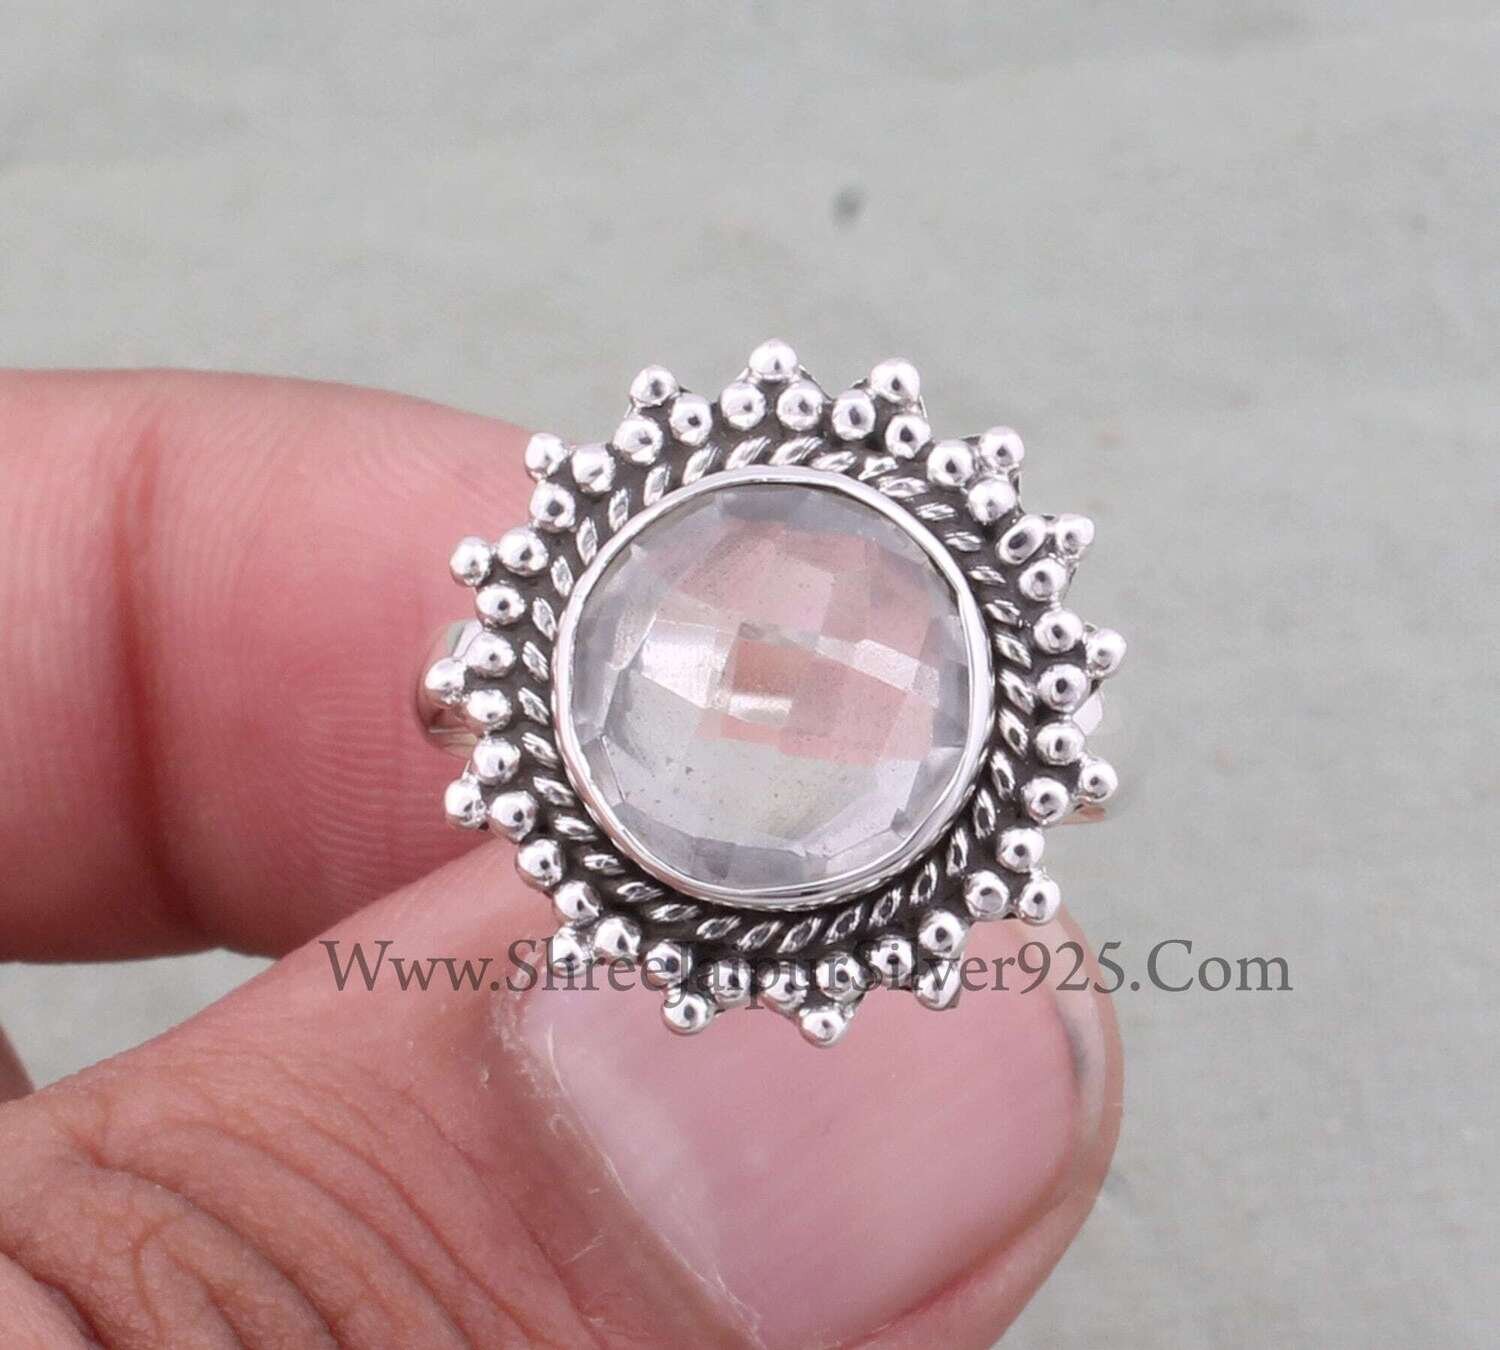 Natural Crystal Quartz Solid 925 Sterling Silver Ring For Women, Handmade Round Faceted Gemstone Silver Flower Ring Gift For Her Anniversary